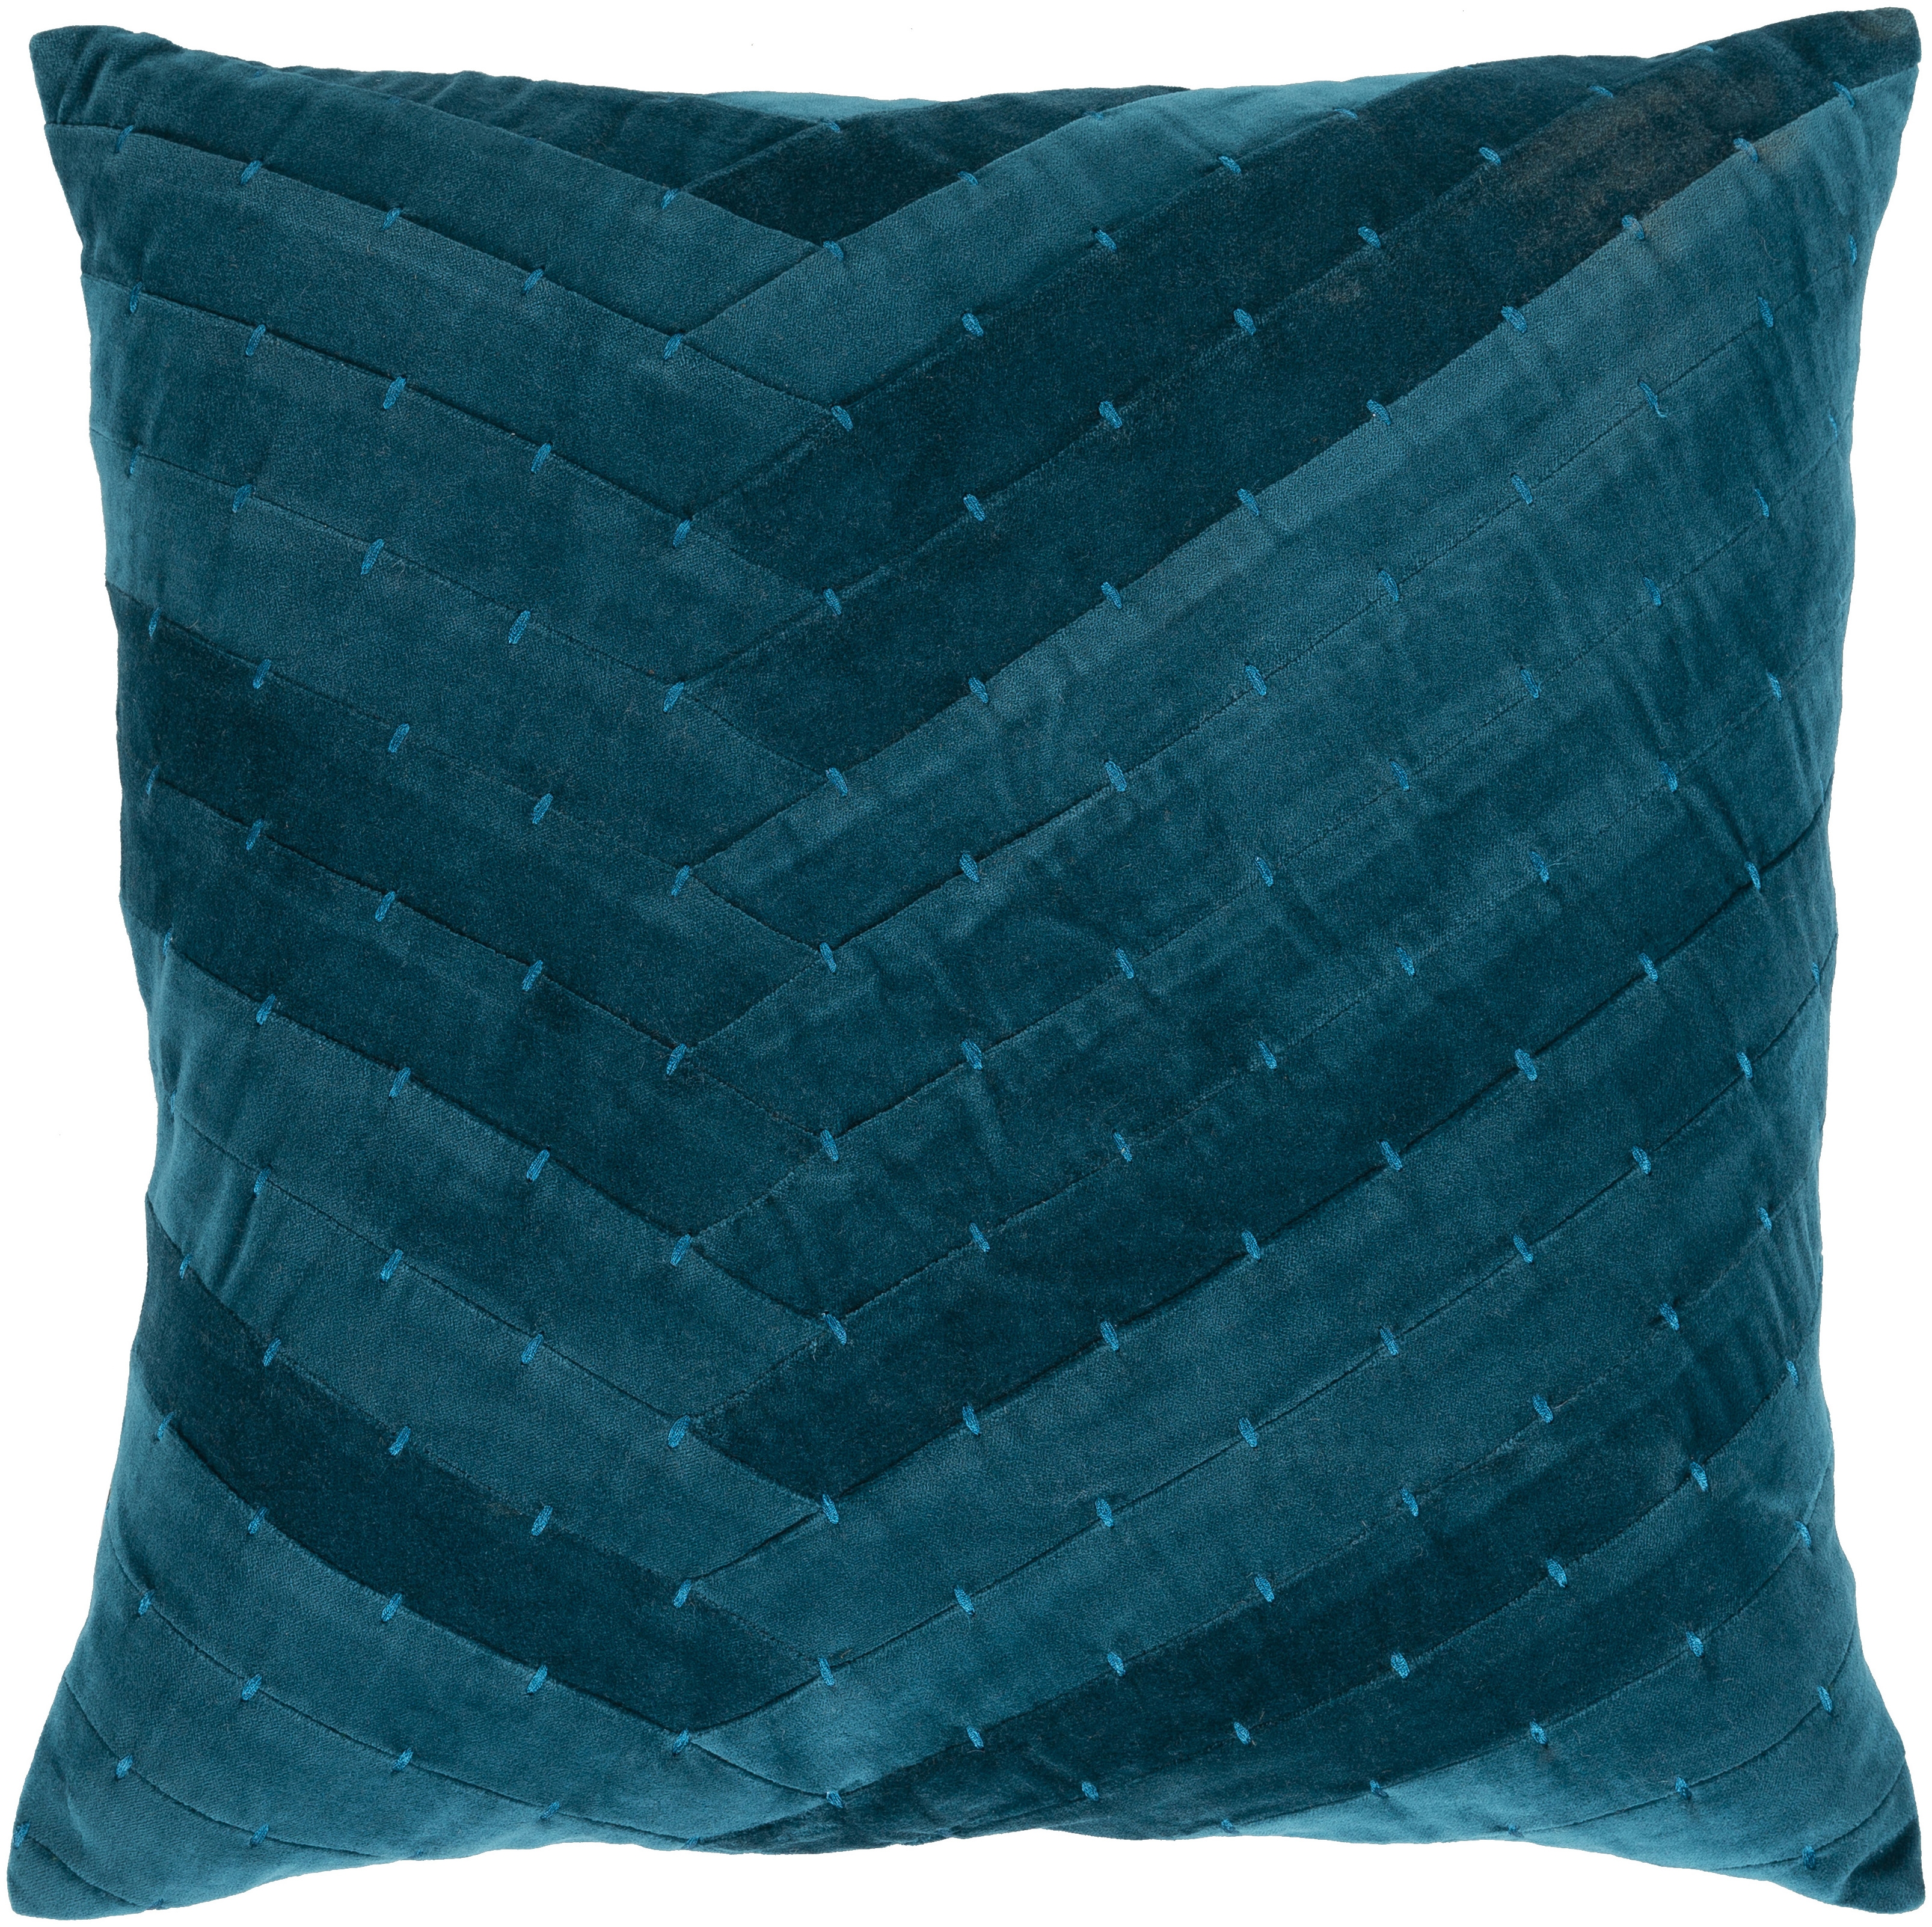 Aviana Throw Pillow, 20" x 20", with poly insert - Image 0